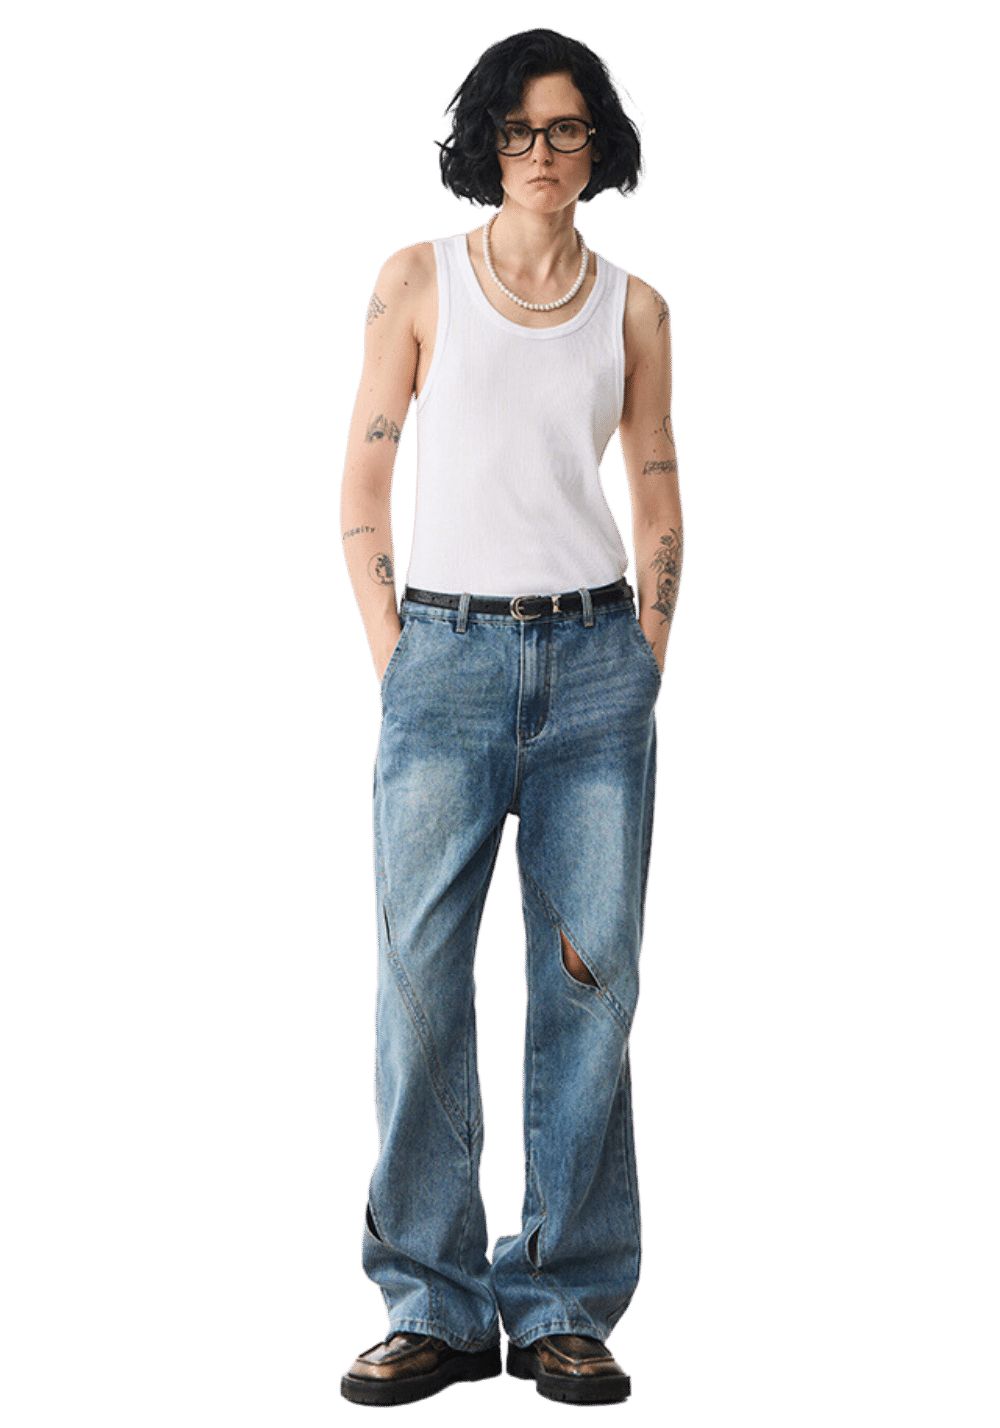 Distressed Hollow Out Jeans - PSYLOS 1, Distressed Hollow Out Jeans, Pants, MODITEC, PSYLOS 1